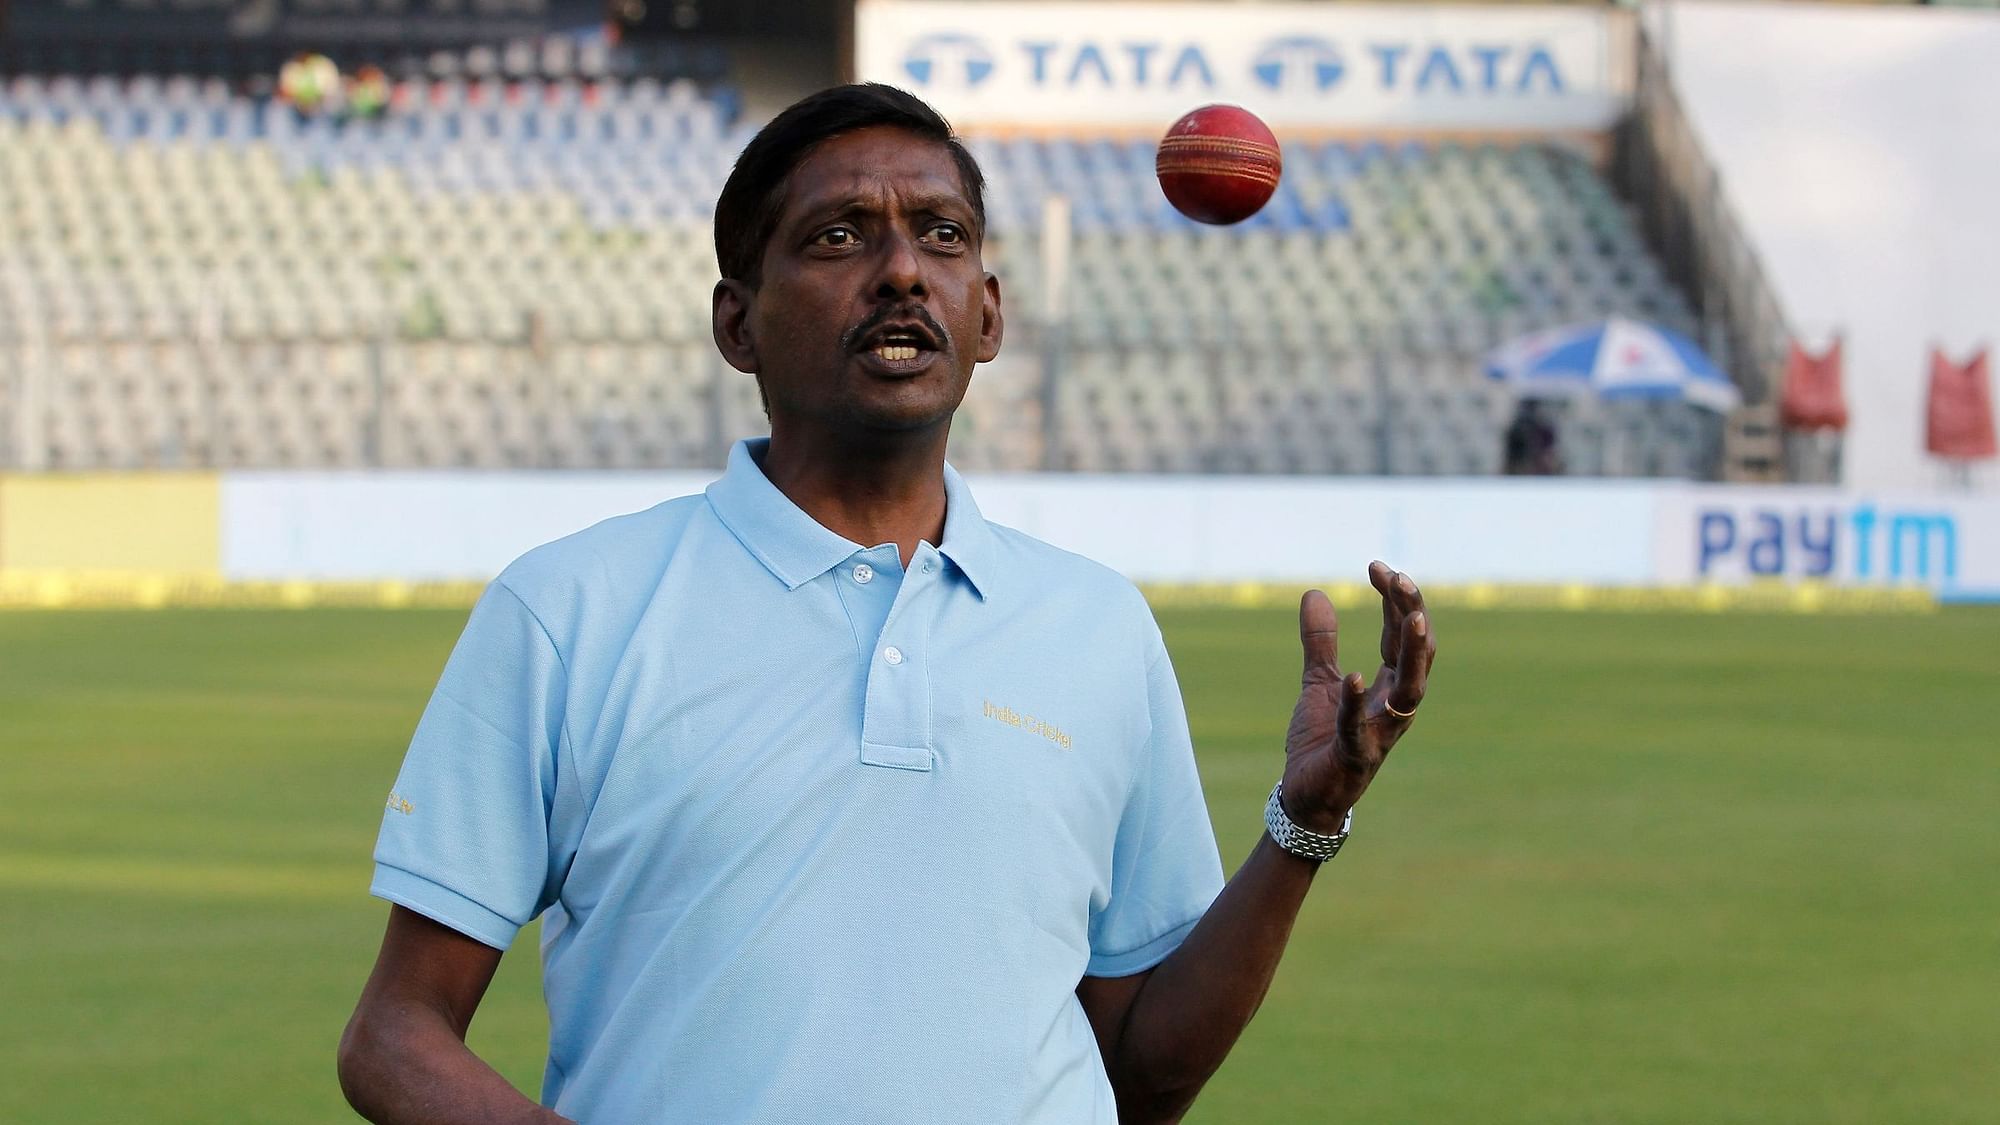 The 54-year-old Laxman Sivaramakrishnan has played nine Tests and 16 ODIs besides being a commentator for more than 20 years.